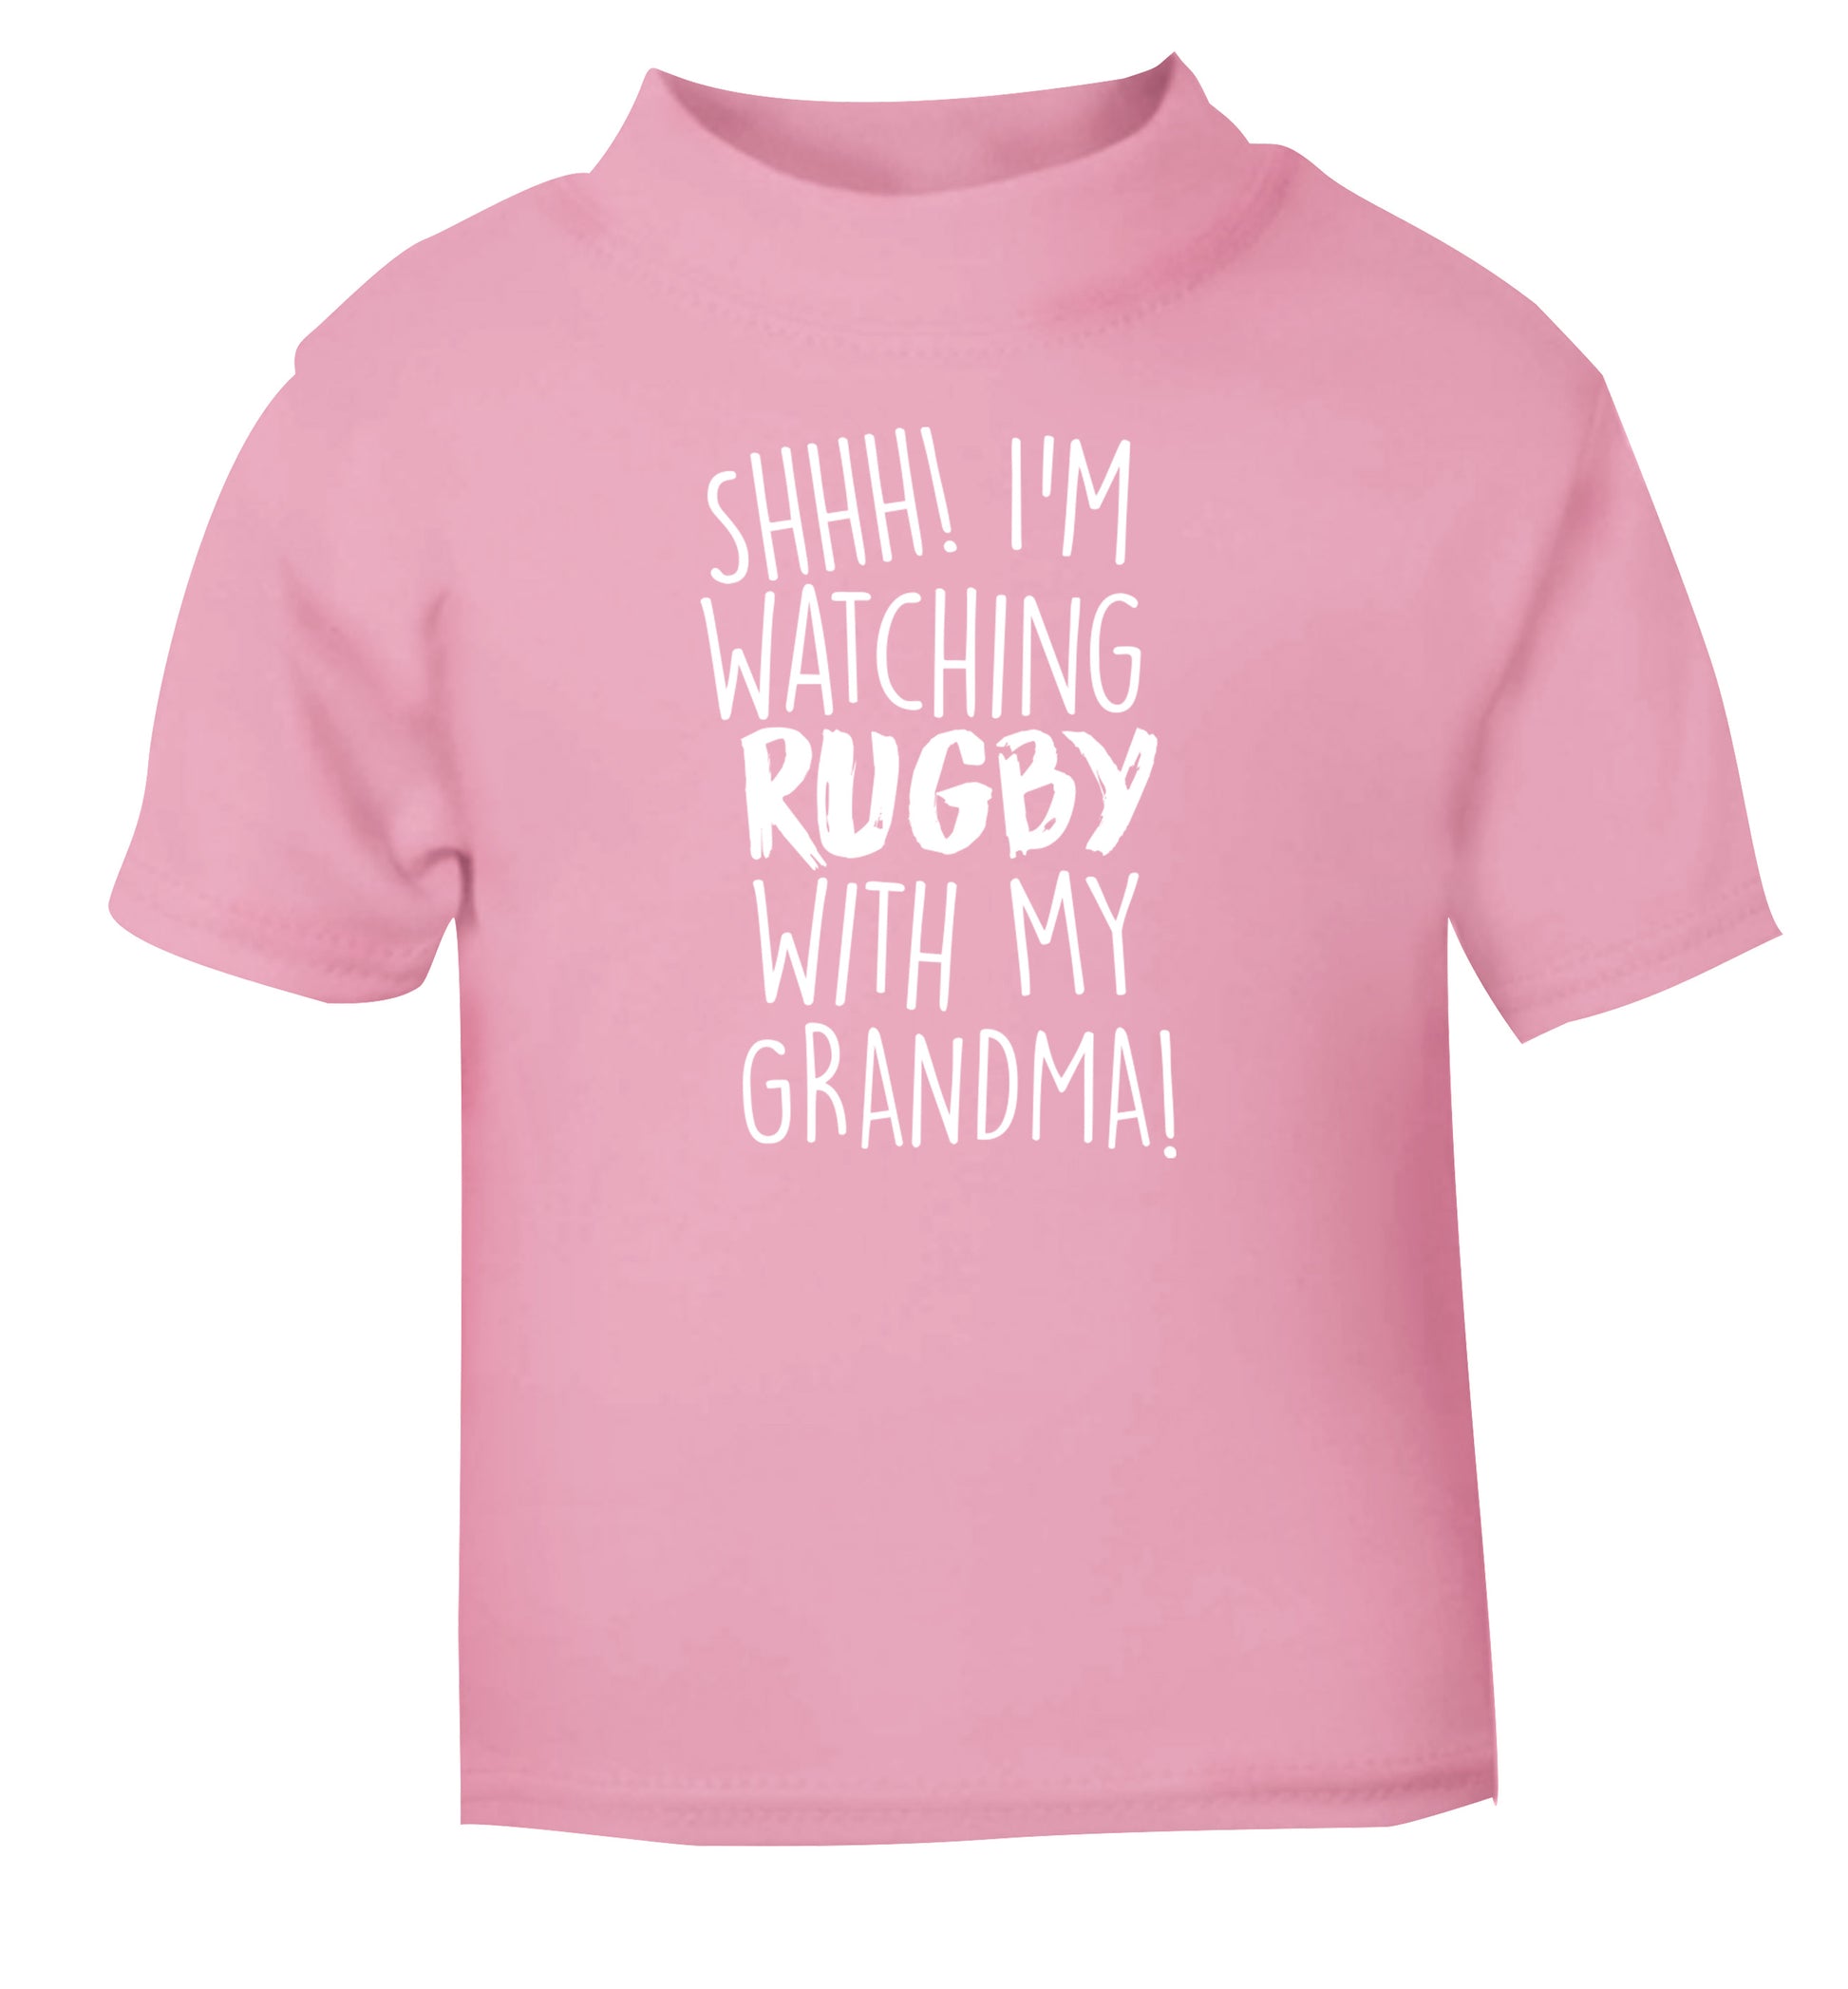 Shh I'm watching rugby with my grandma light pink Baby Toddler Tshirt 2 Years